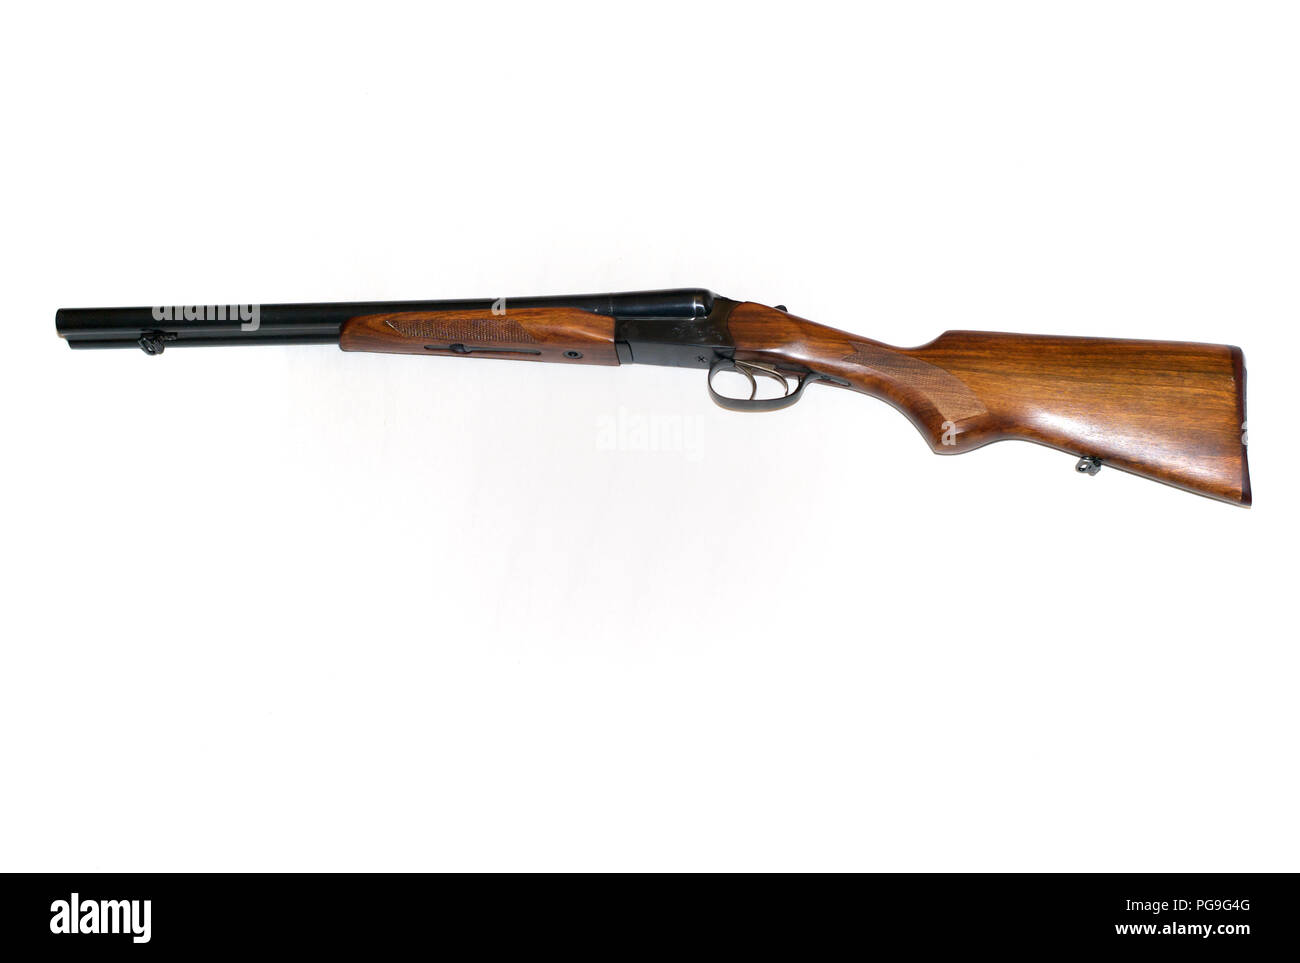 Double Barrel Shotgun, Side by Side Gun with Blued Barrels and Wooden Stock on White Background Stock Photo